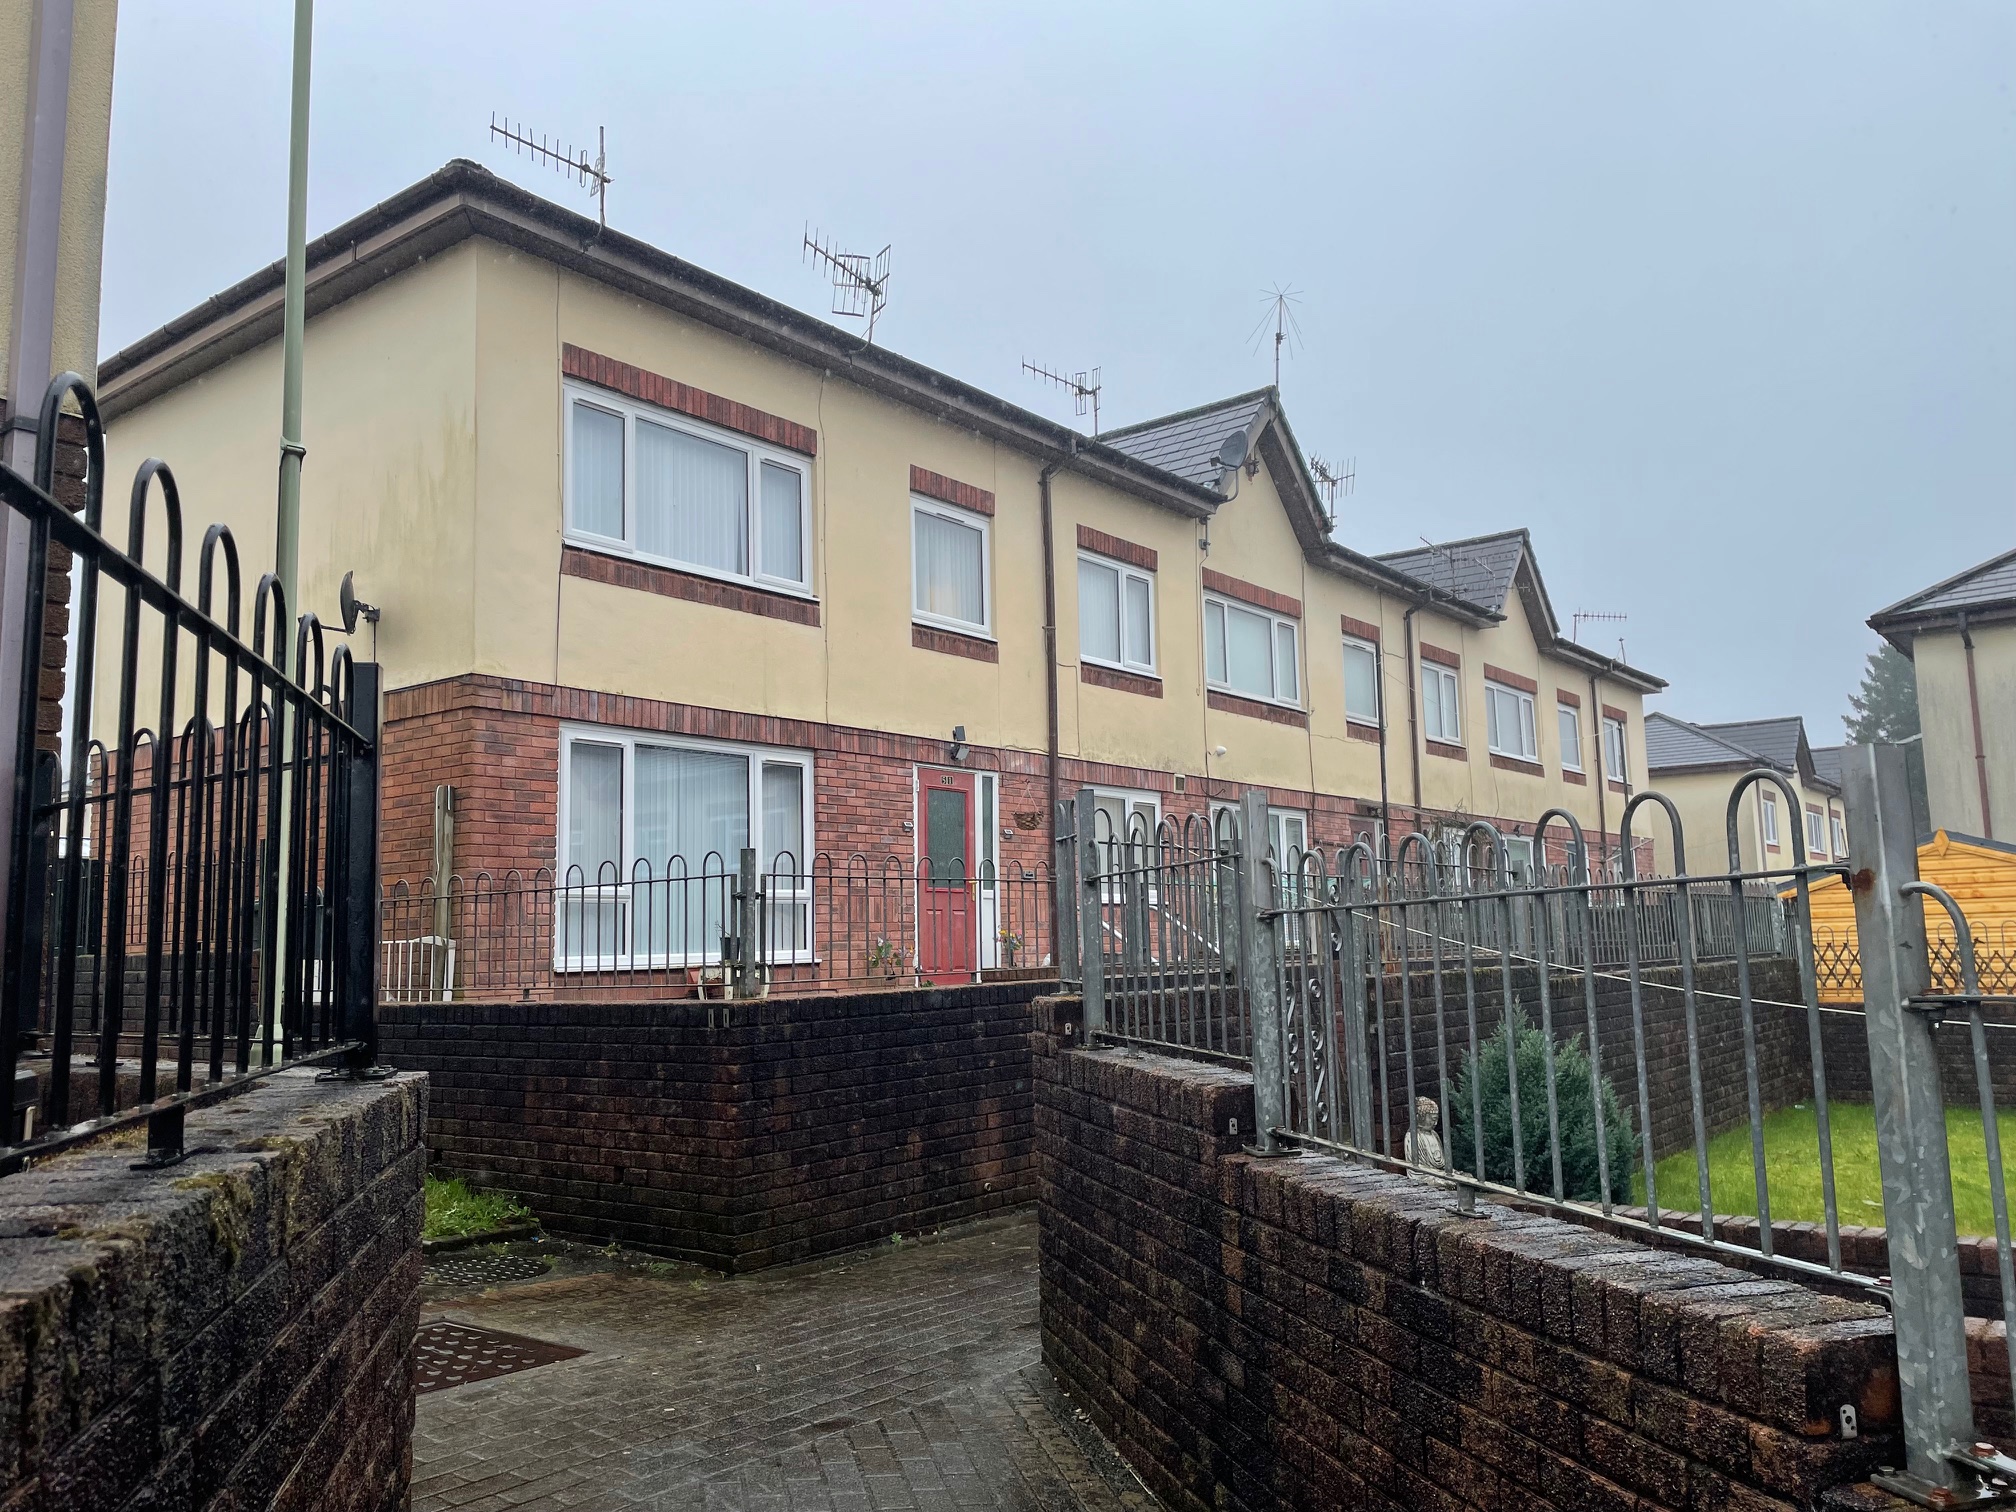 A row of modern terraced houses on an overcast day, featuring brick fences and metal gates.